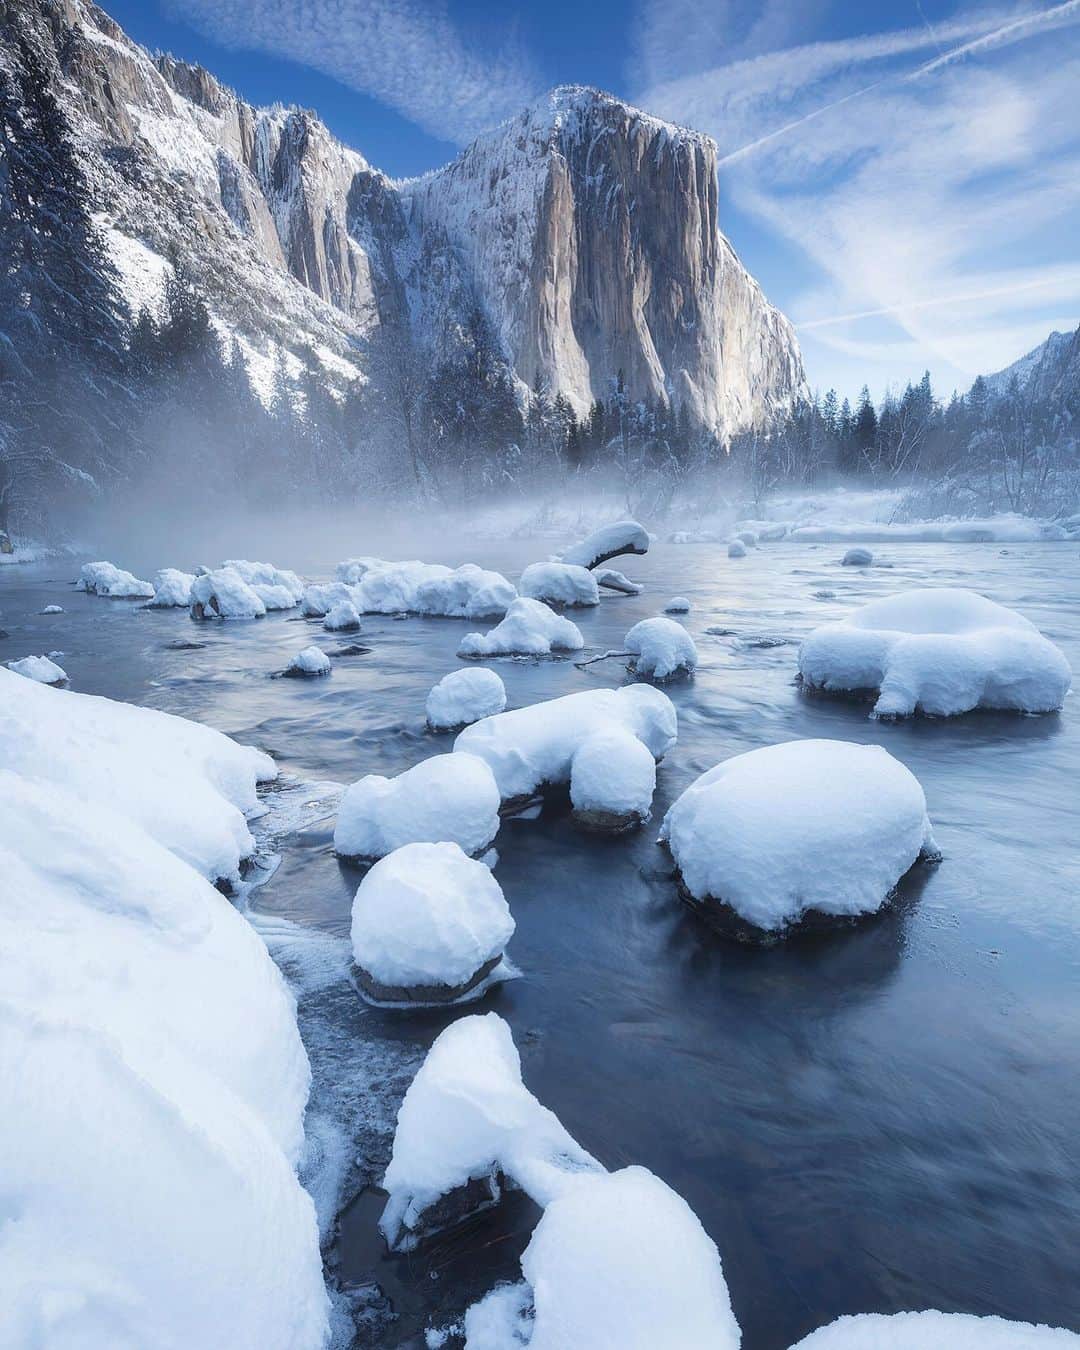 Chase Dekker Wild-Life Imagesのインスタグラム：「There’s nothing like Yosemite covered in a fresh layer of snow. While every season has something to offer, the winter season brings solitude, icicles clinging to the granite cliffs, and of course the very famous Firefall. What’s your favorite season in Yosemite?」